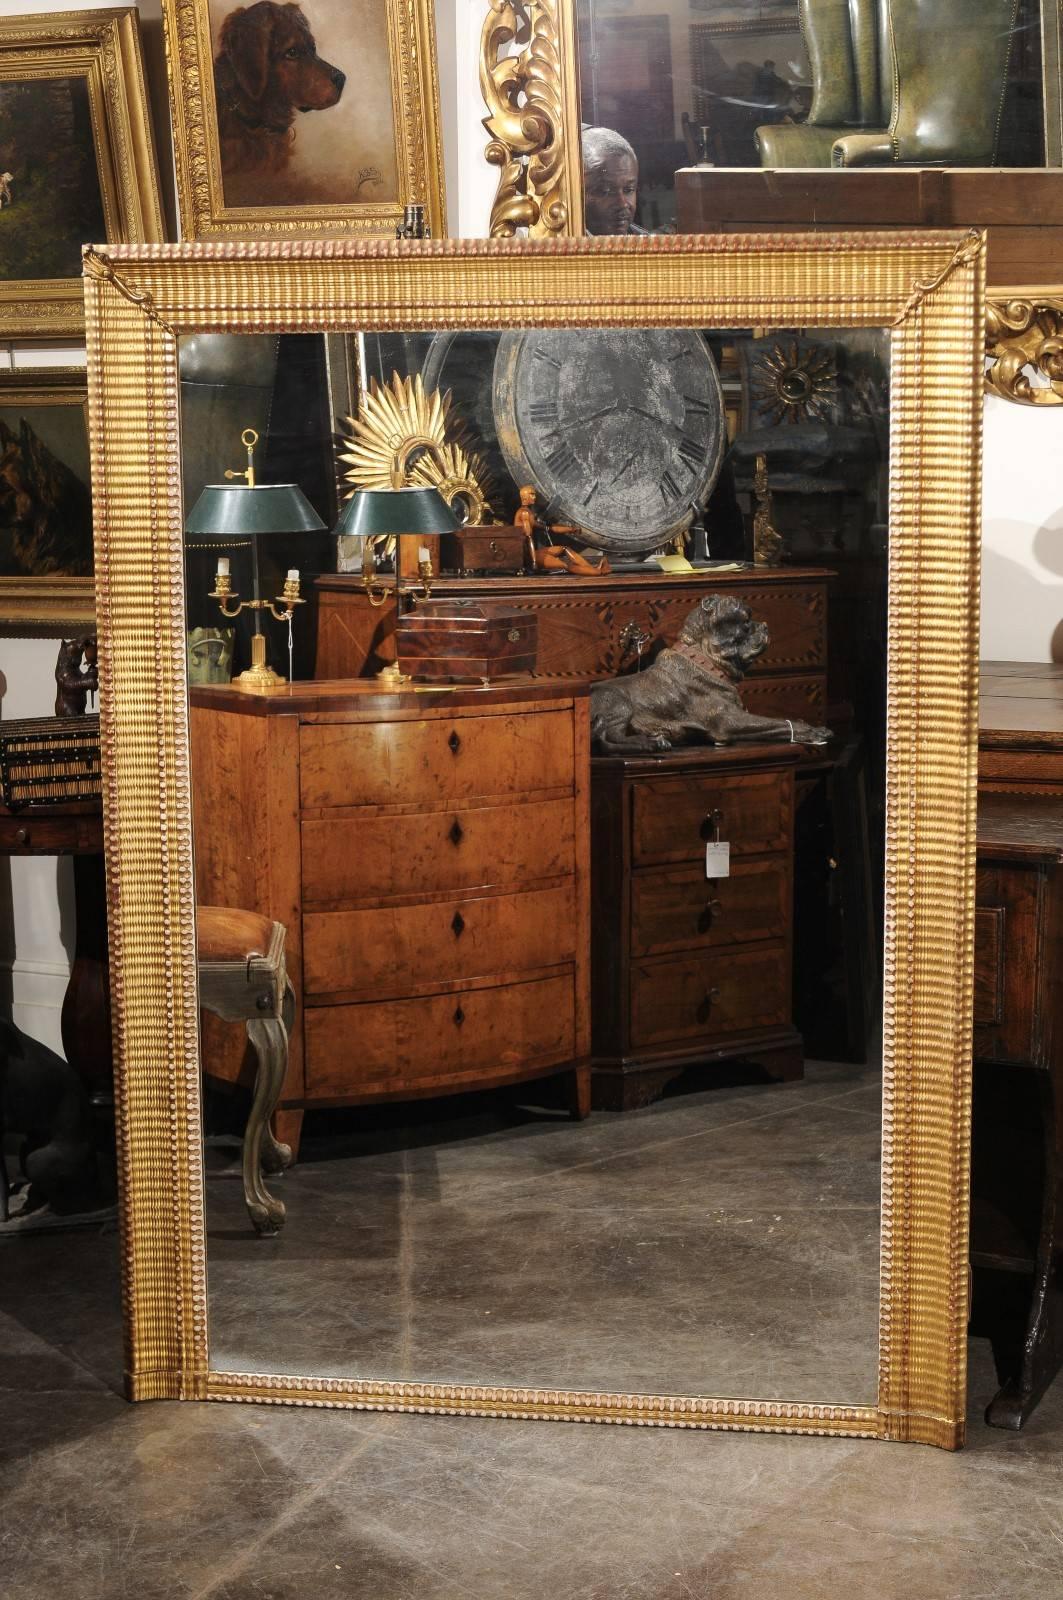 A large French rectangular giltwood mirror from the turn of the century. This French mirror, circa 1900 (or earlier) is made of a gilded rectangular ridged wooden frame, adorned with delicate foliage motifs in the top corners. The central part, made